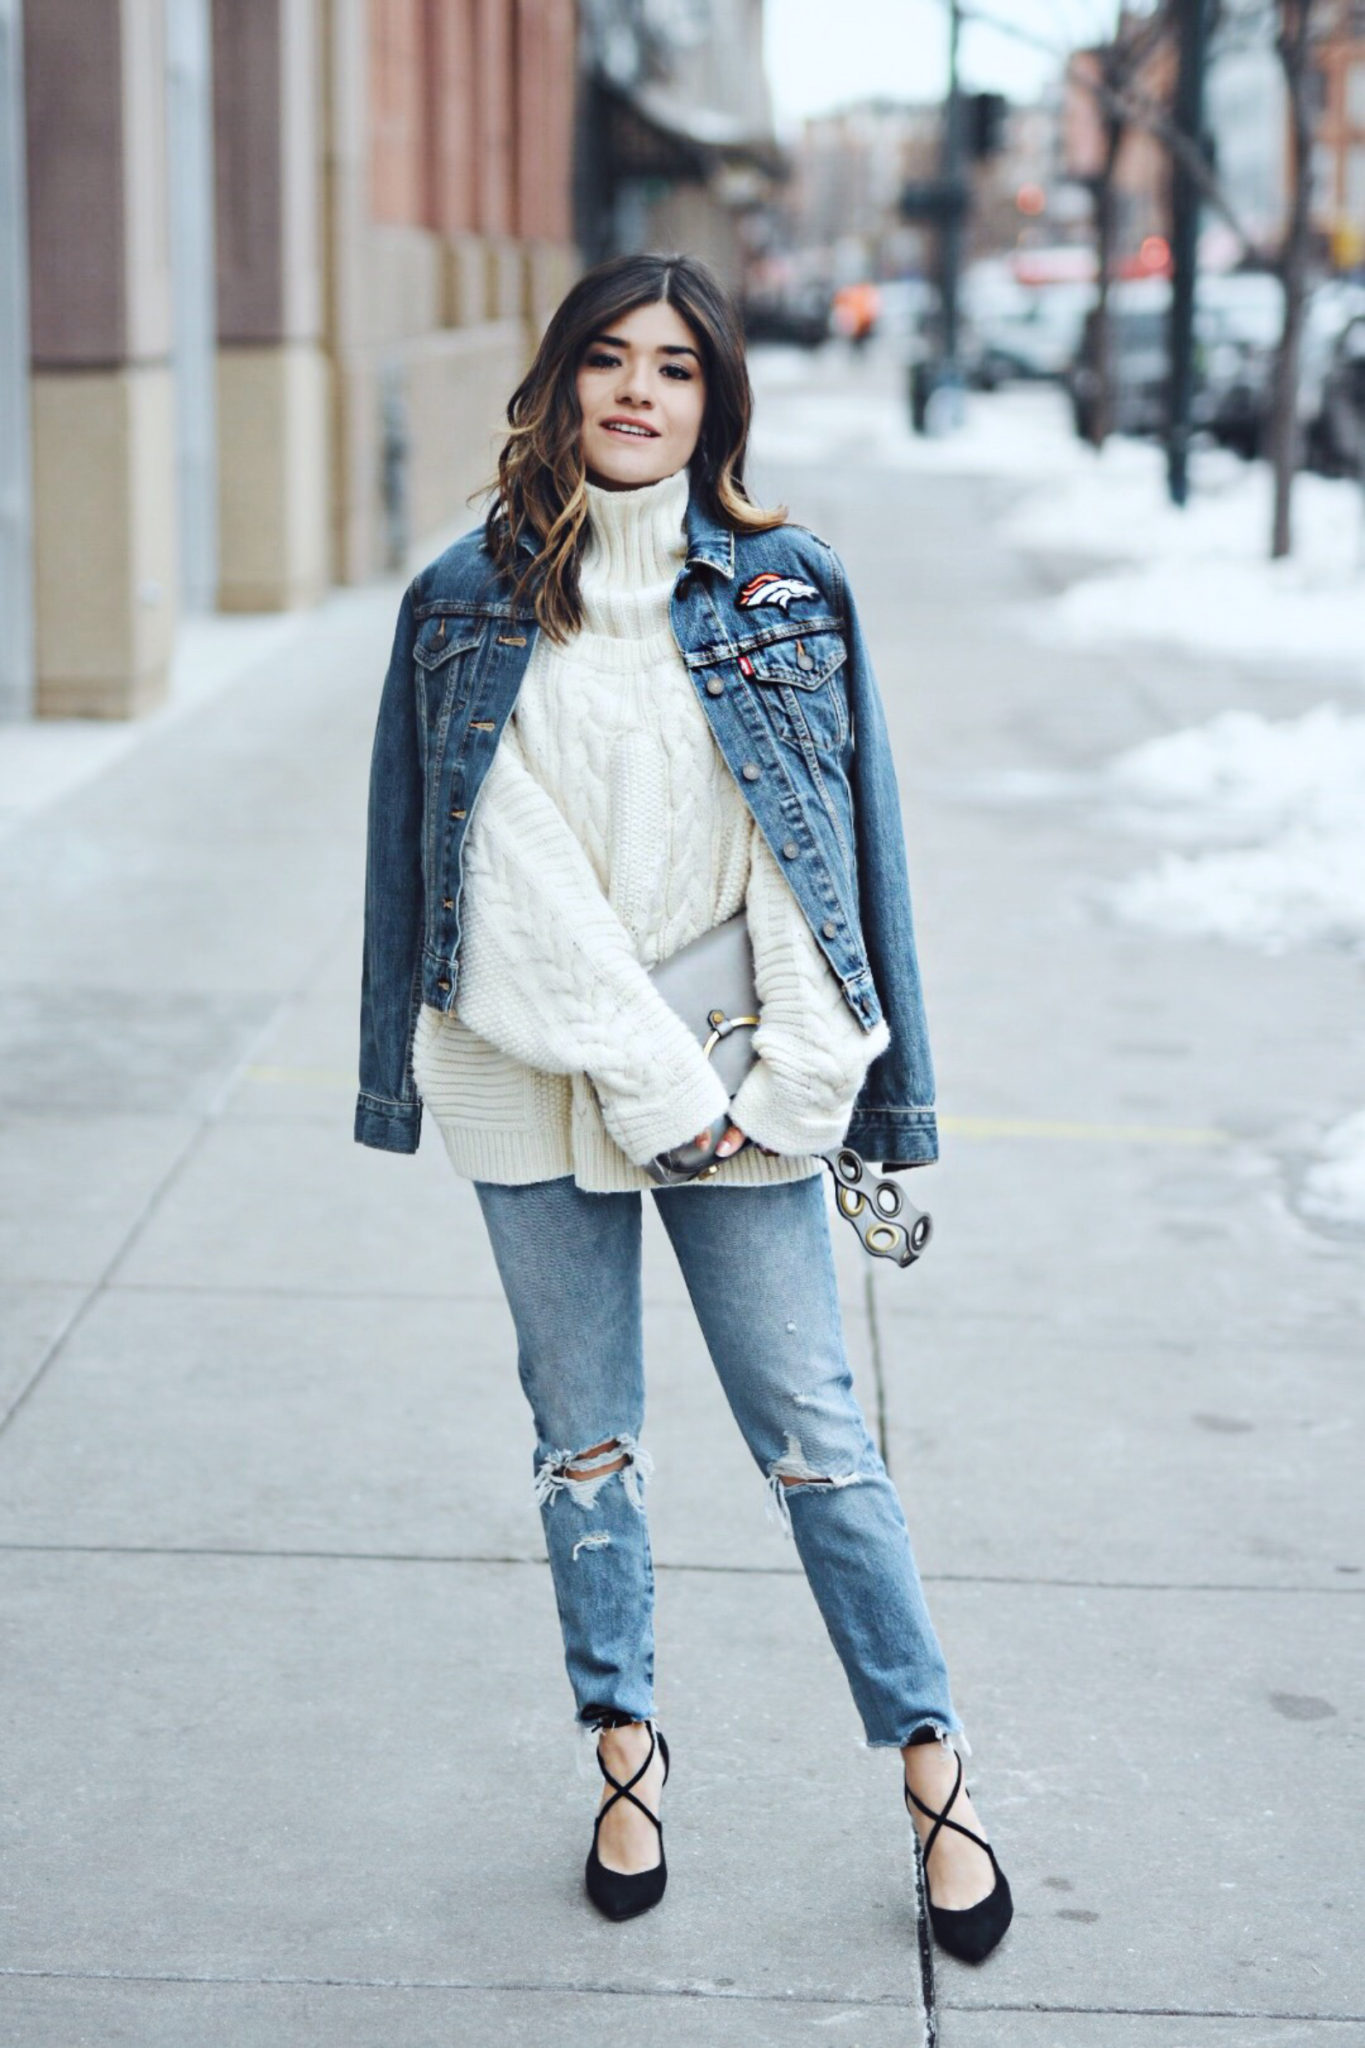 What to wear for the super bowl weekend -  SUPER BOWL OUTFIT INSPIRATION by popular Denver fashion blogger Chic Talk